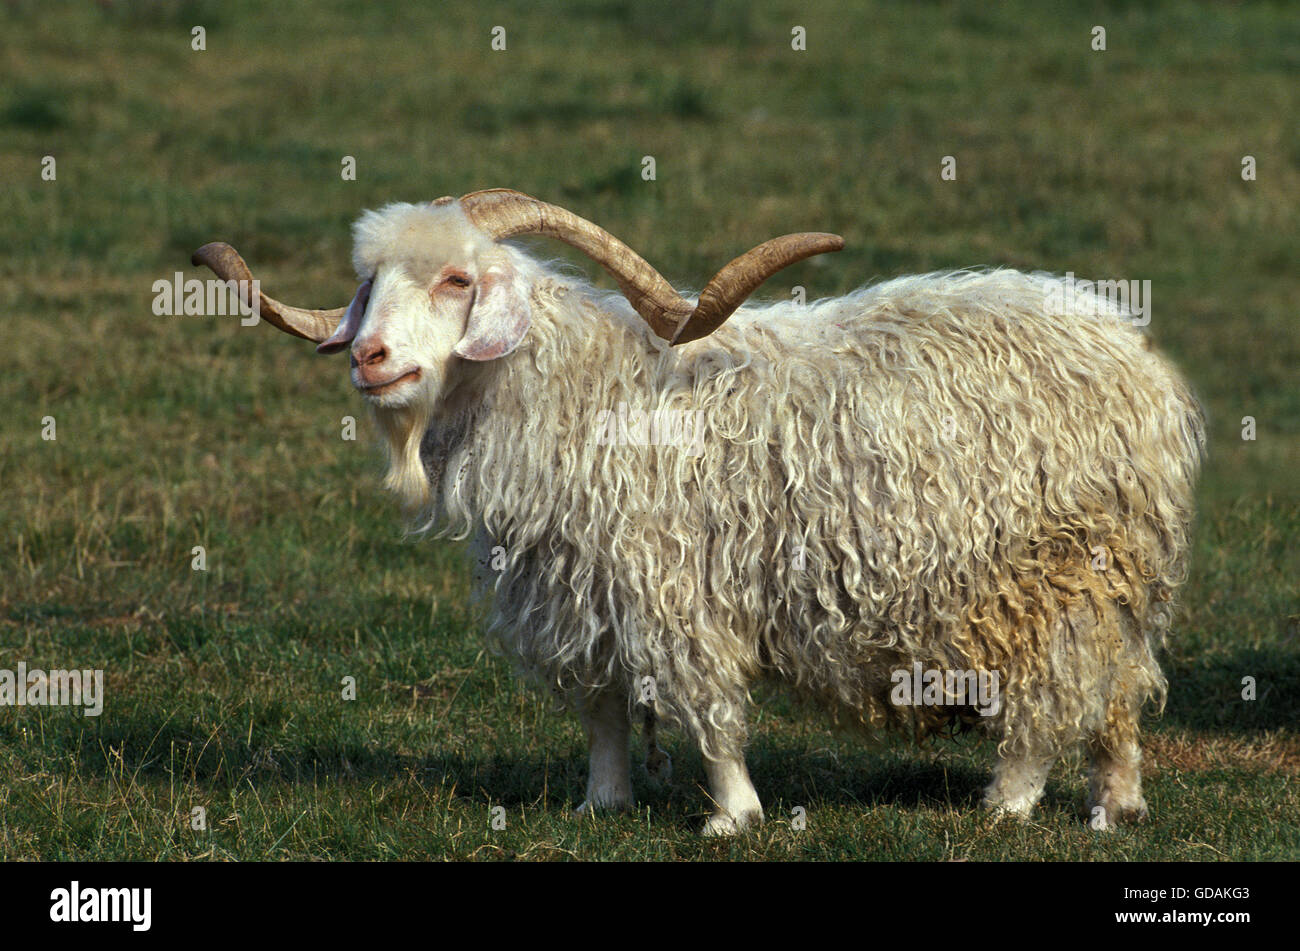 Angora Goat, Breed producing Mohair Wool, Billy-goat with long Horns Stock Photo